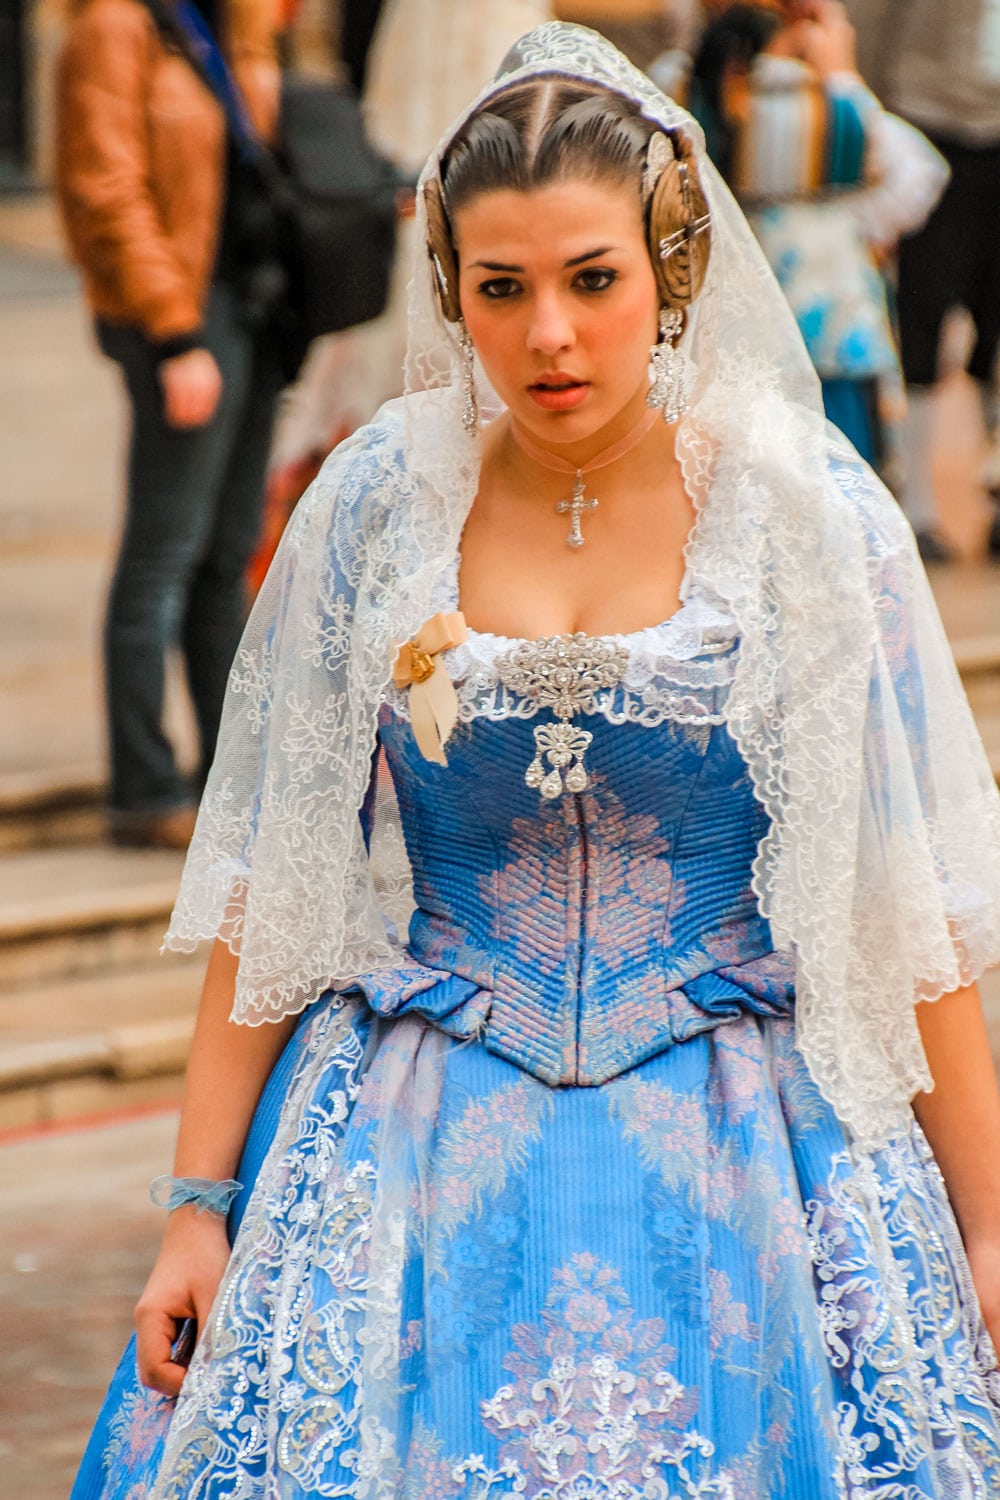 Beautiful women in traditional costumes at the Valencia Fallas.